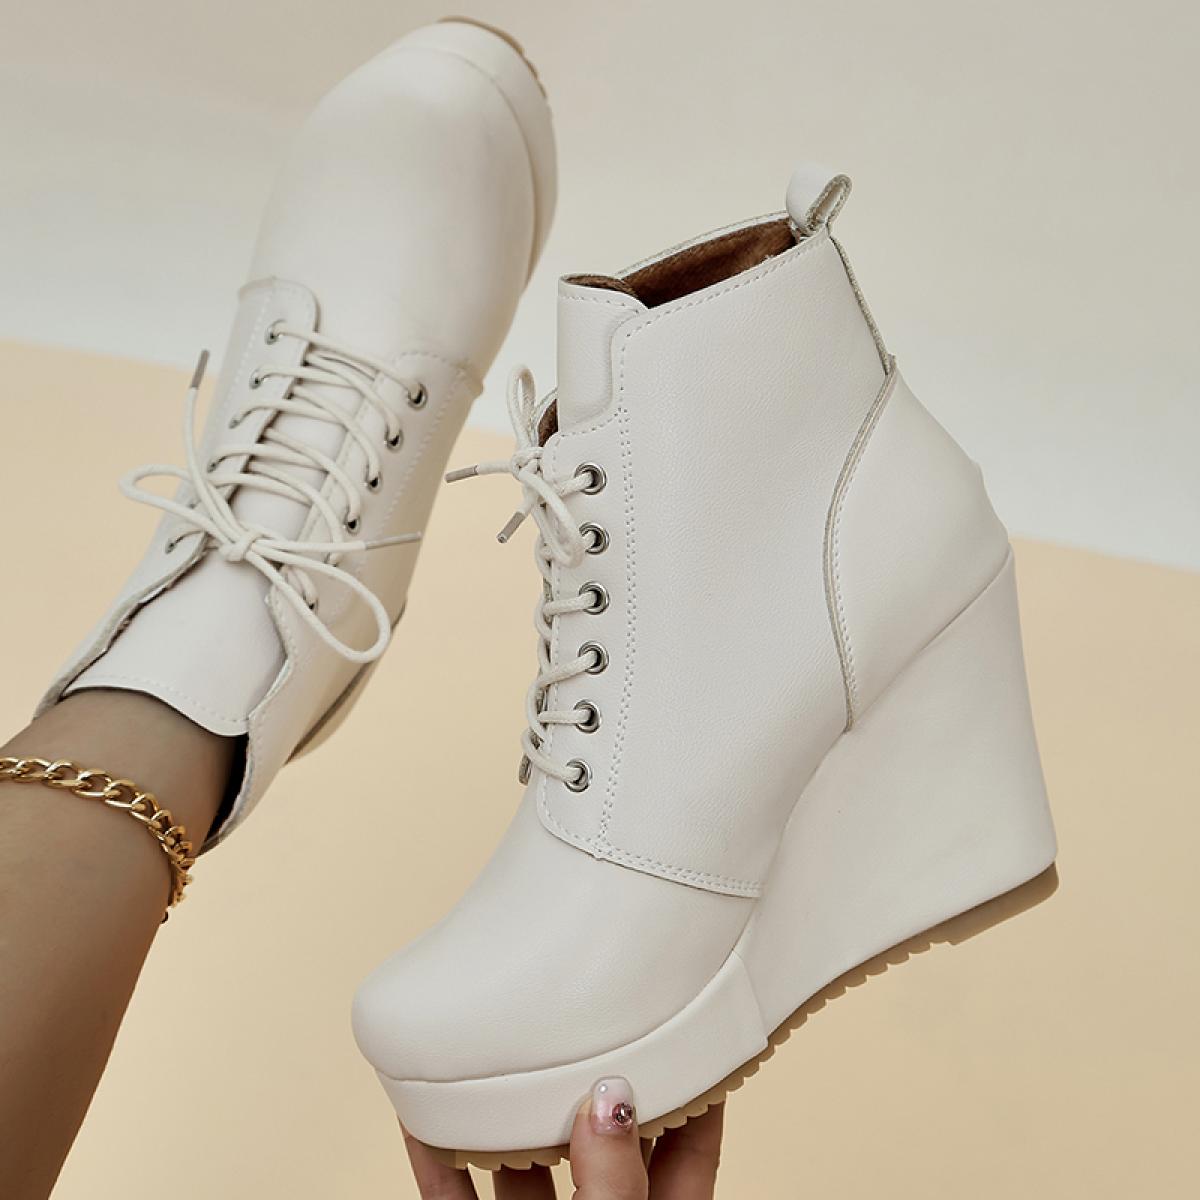 2023 Women Chelsea Boots High Heels Shoes Ankle Winter New Designer Loafers Walking Gladiator Boots Punk Oxford Ladies B